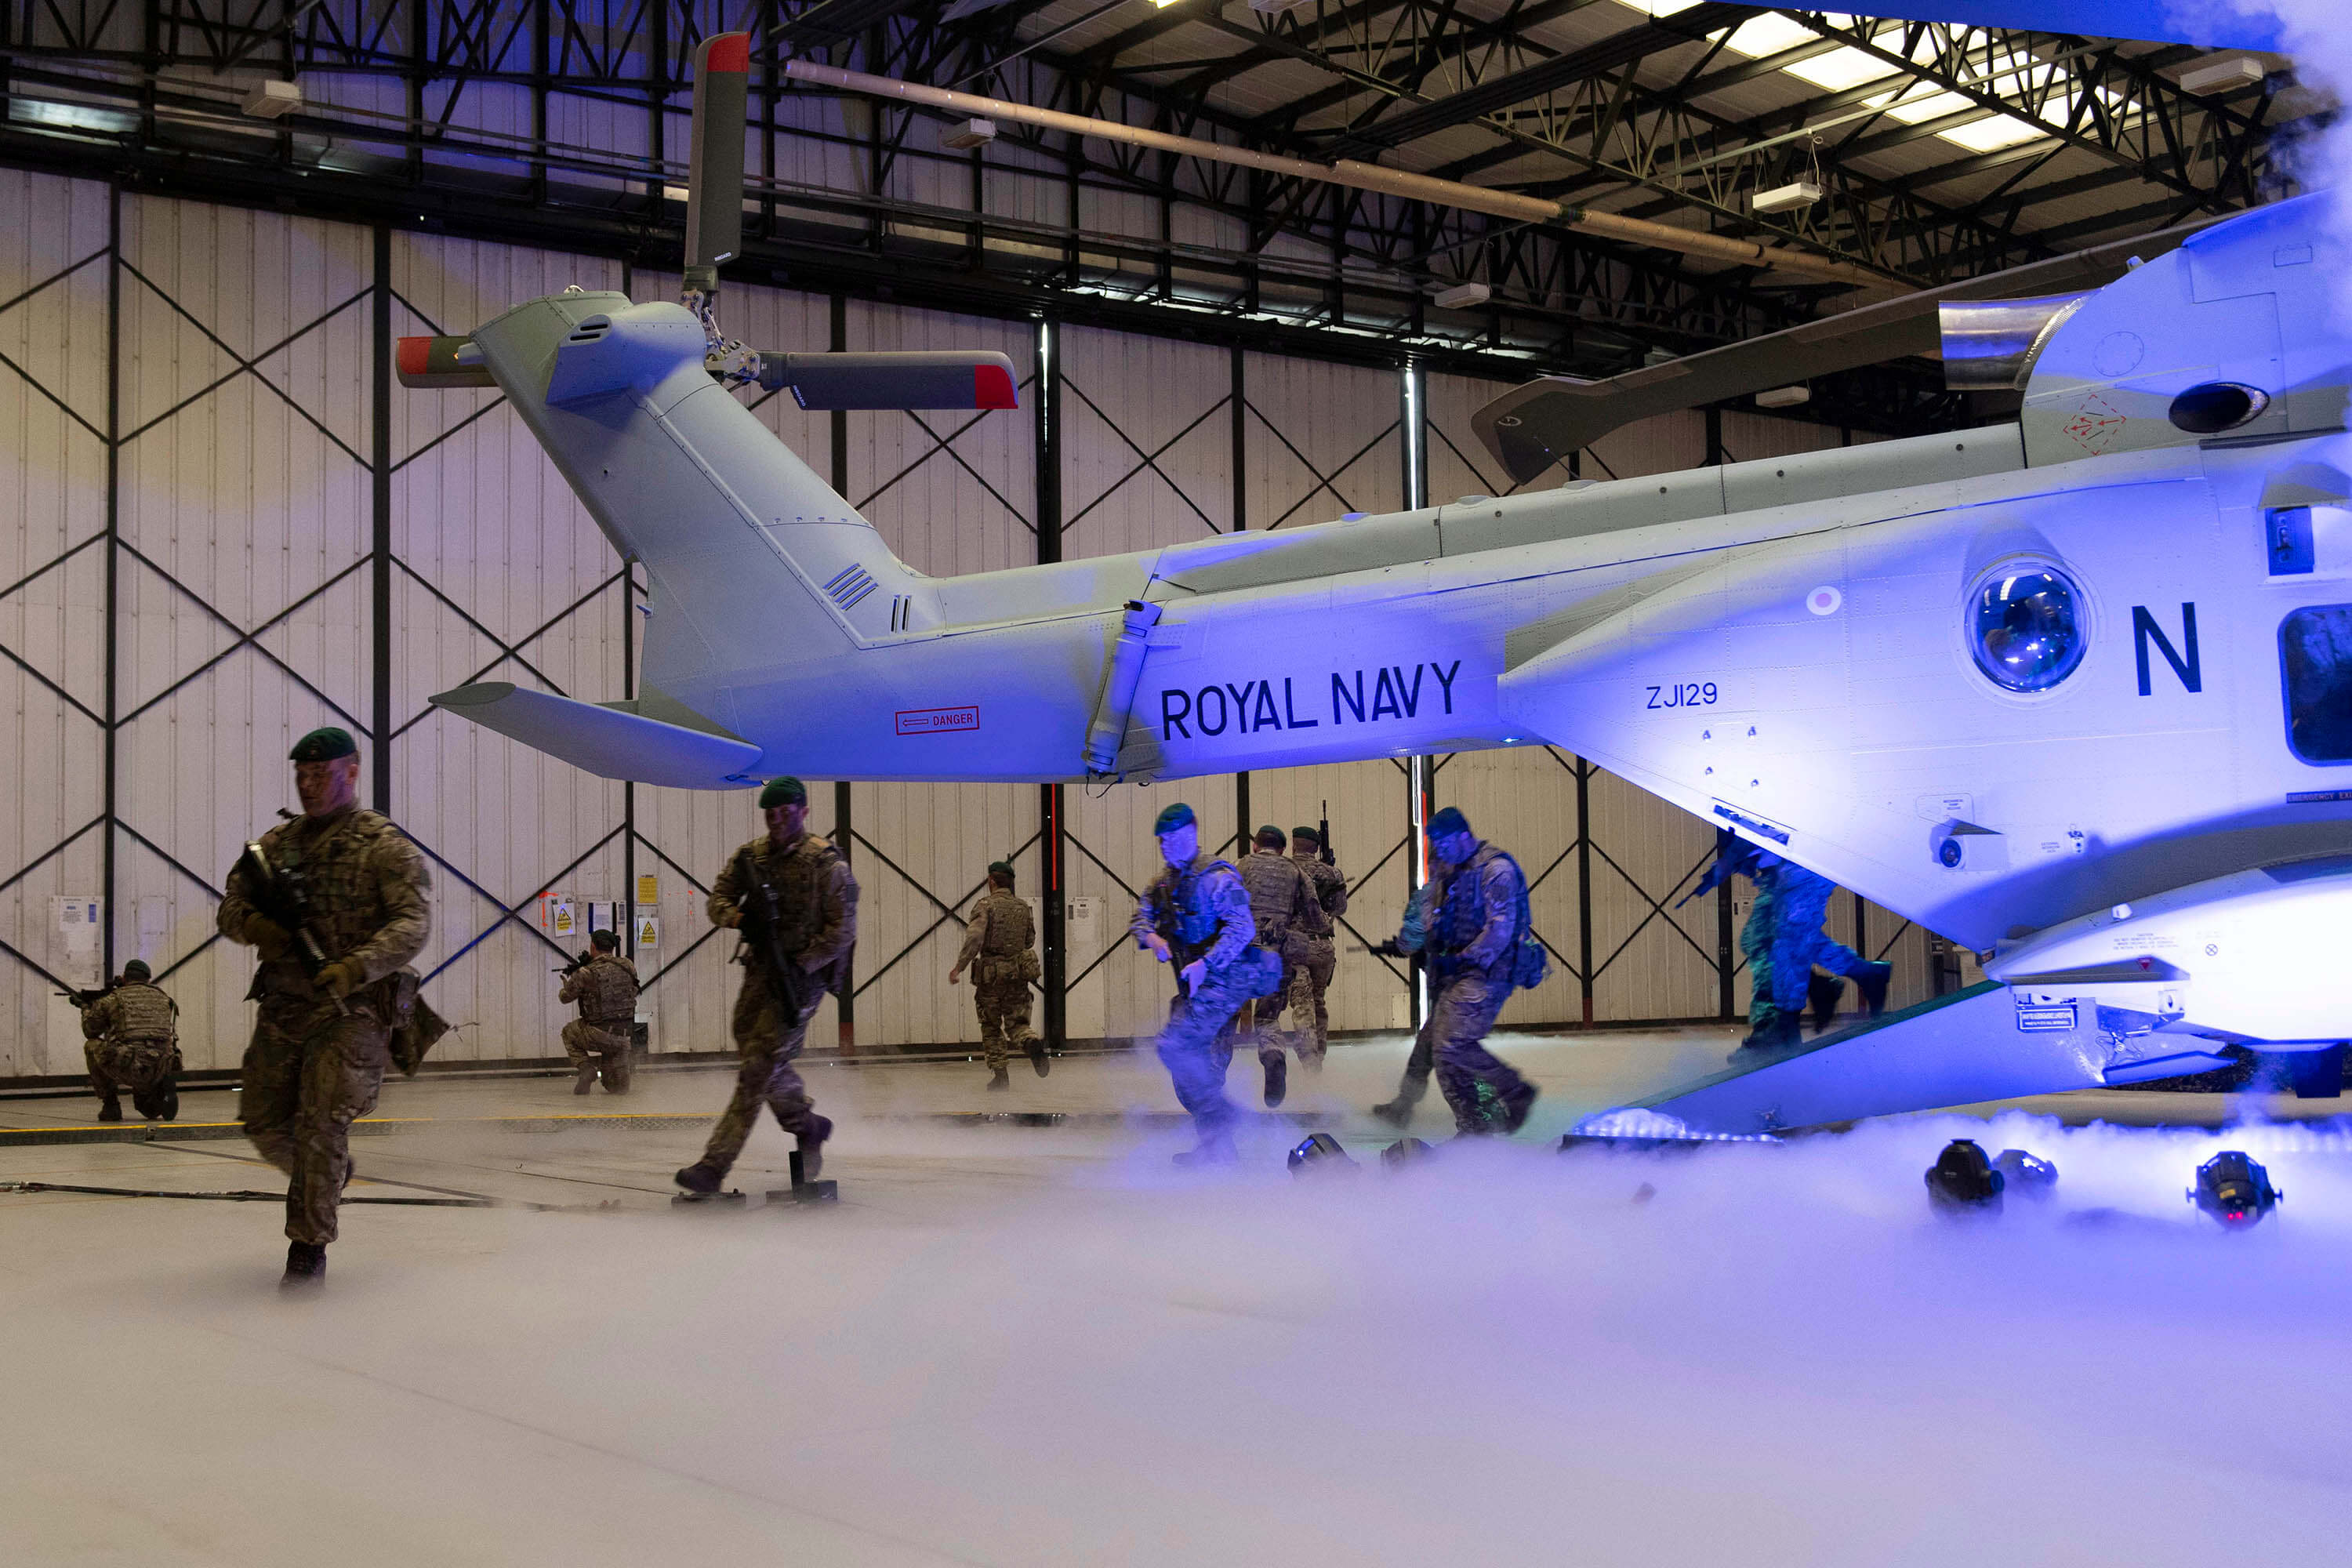 A helicopter in a hangar with soliders coming out of the rear